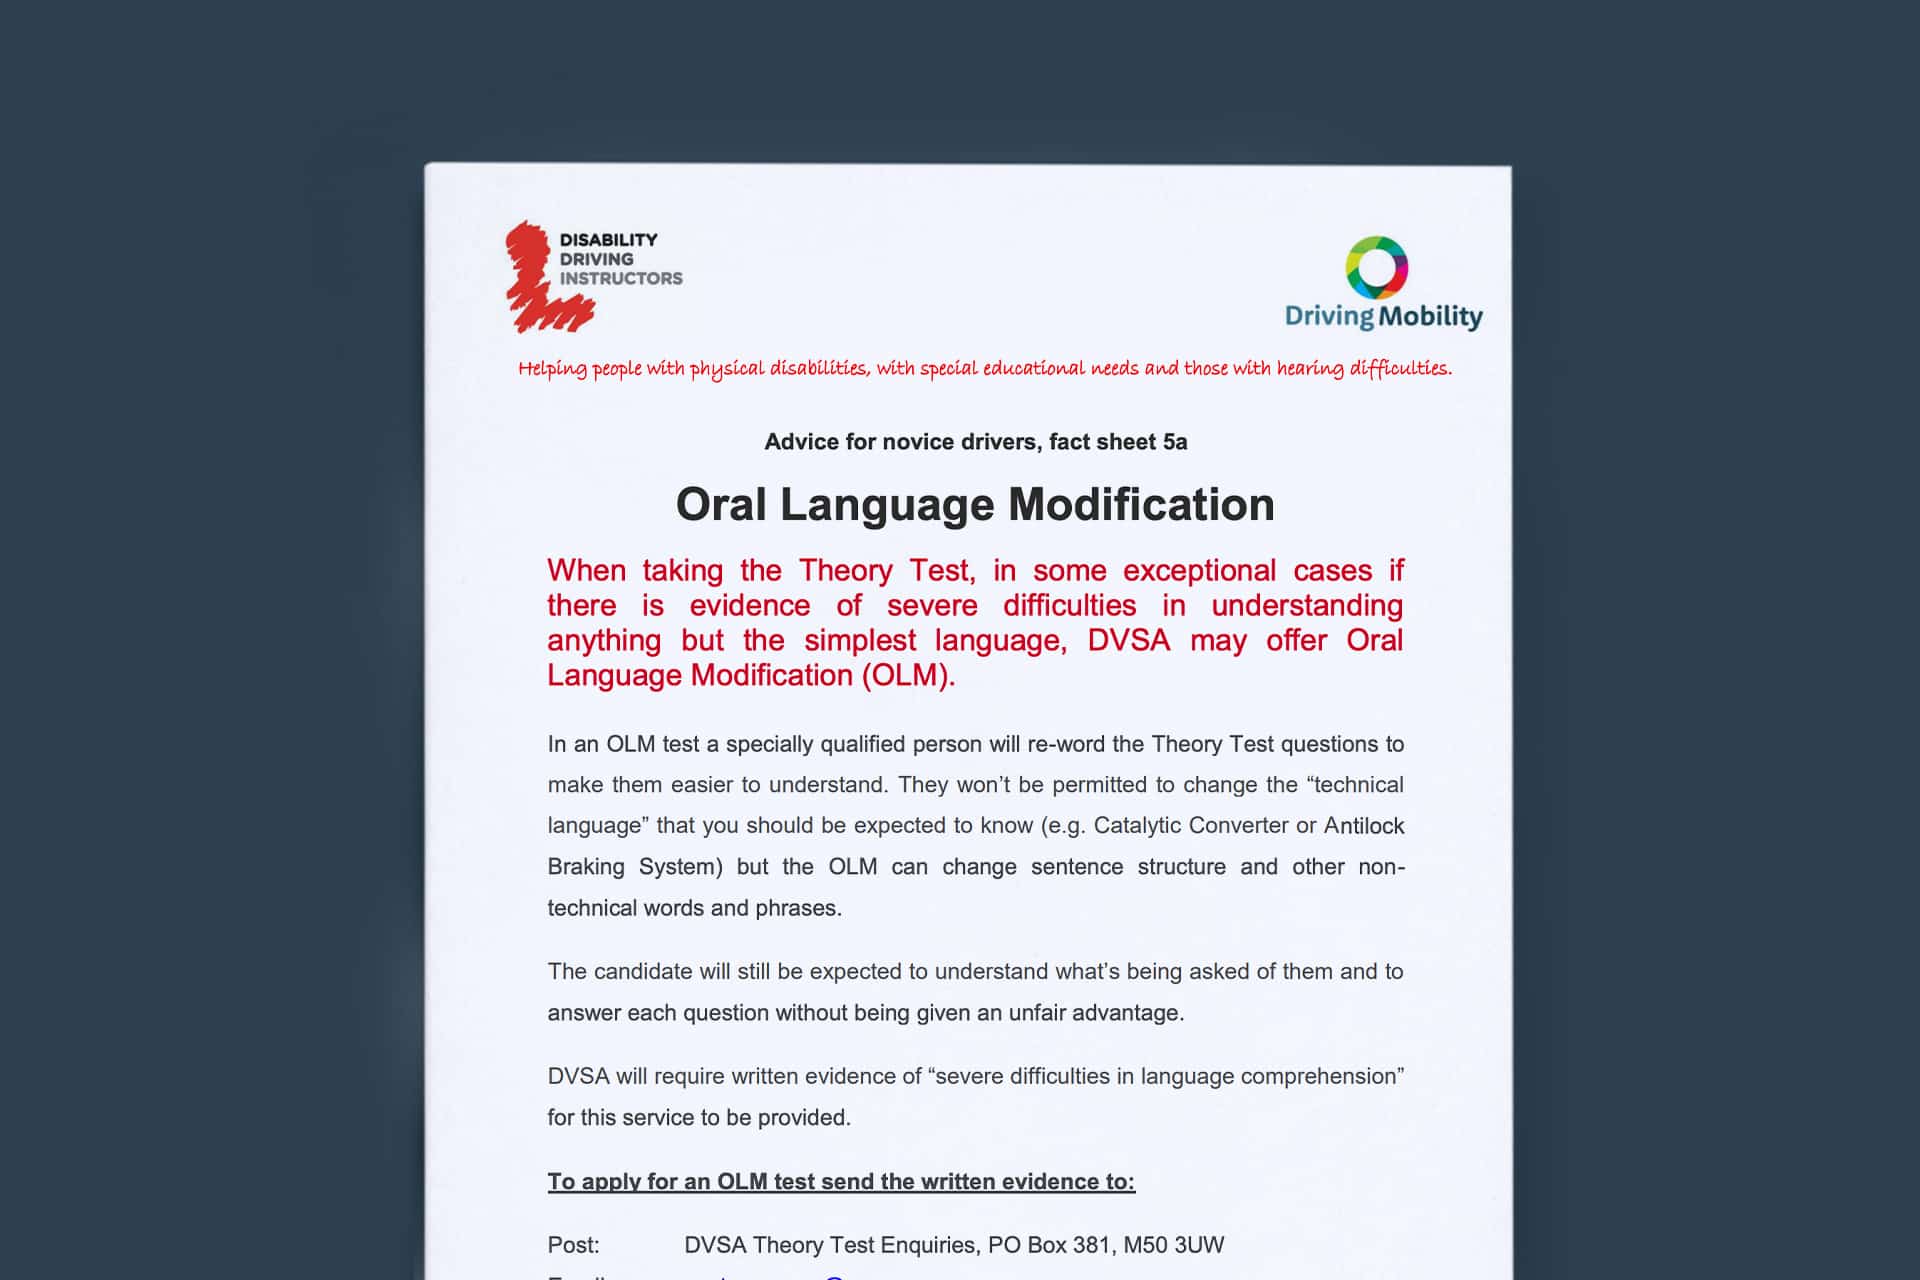 COVID-19 Oral Language Modification for the theory test